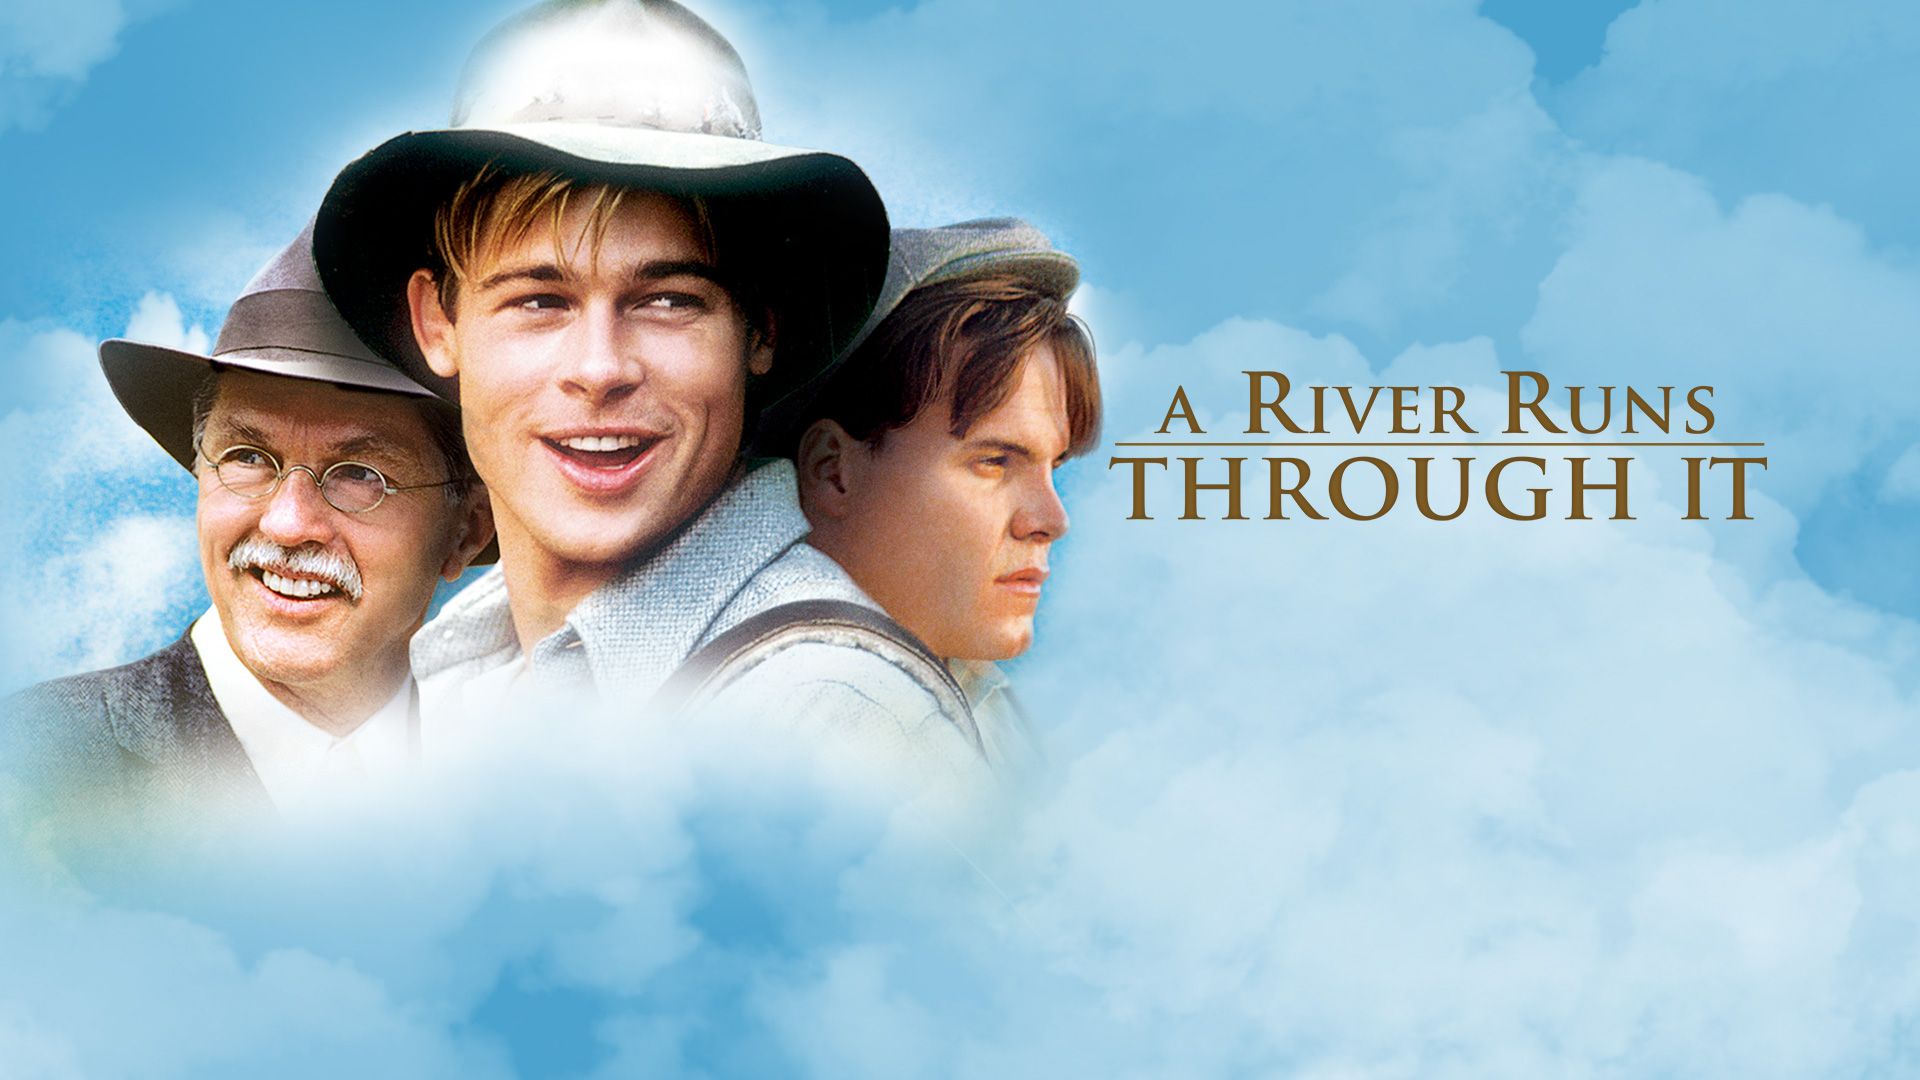 46-facts-about-the-movie-a-river-runs-through-it